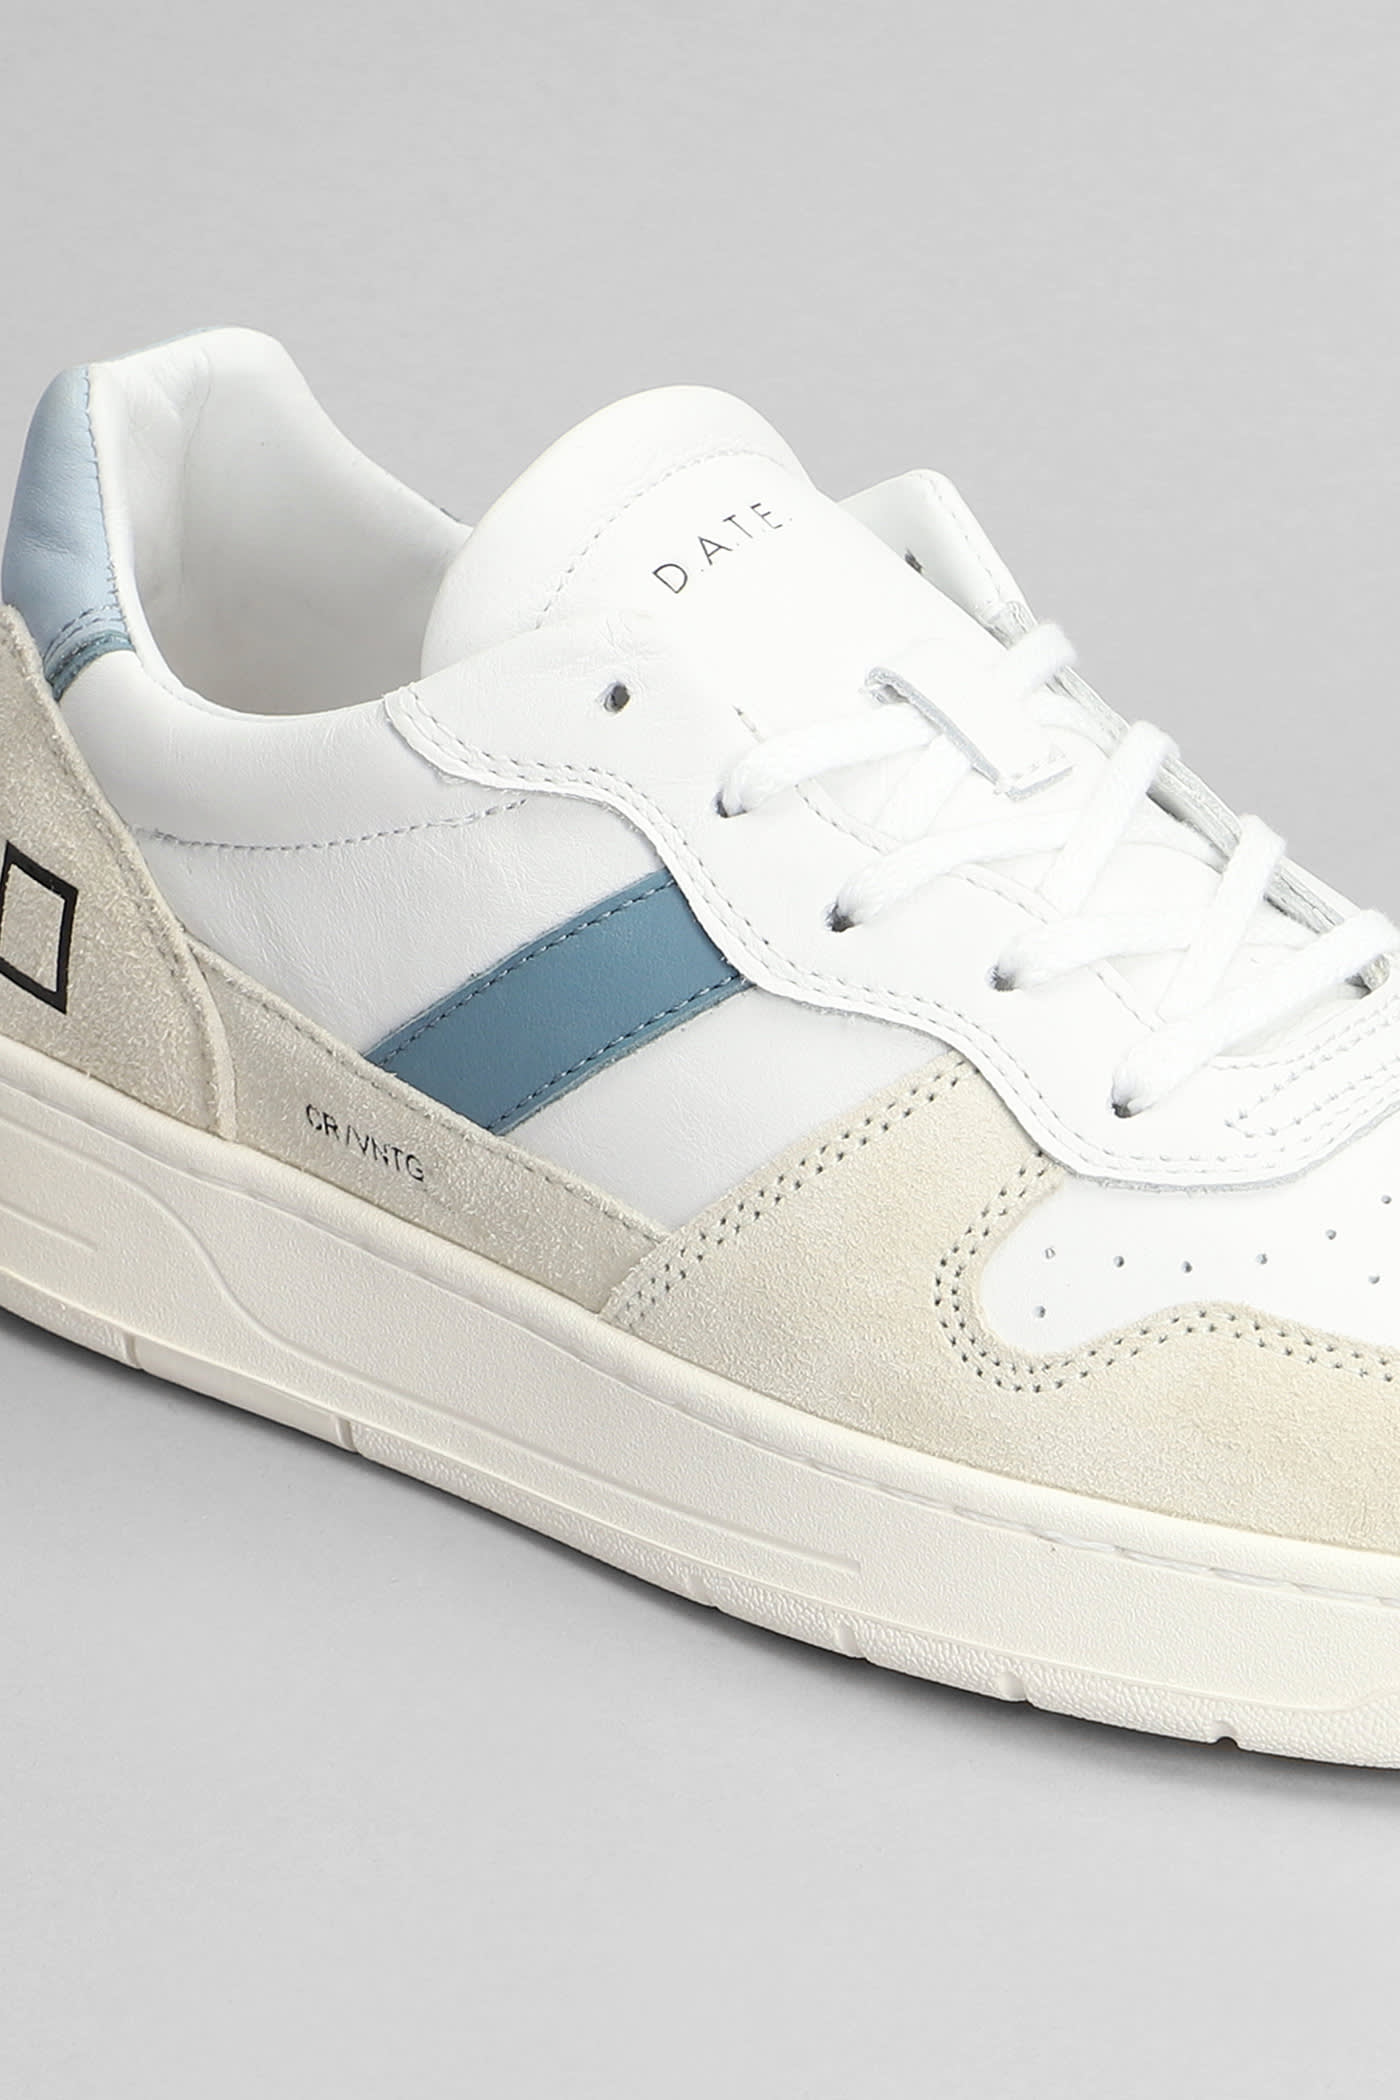 Shop Date Court 2.0 Sneakers In White Suede And Leather